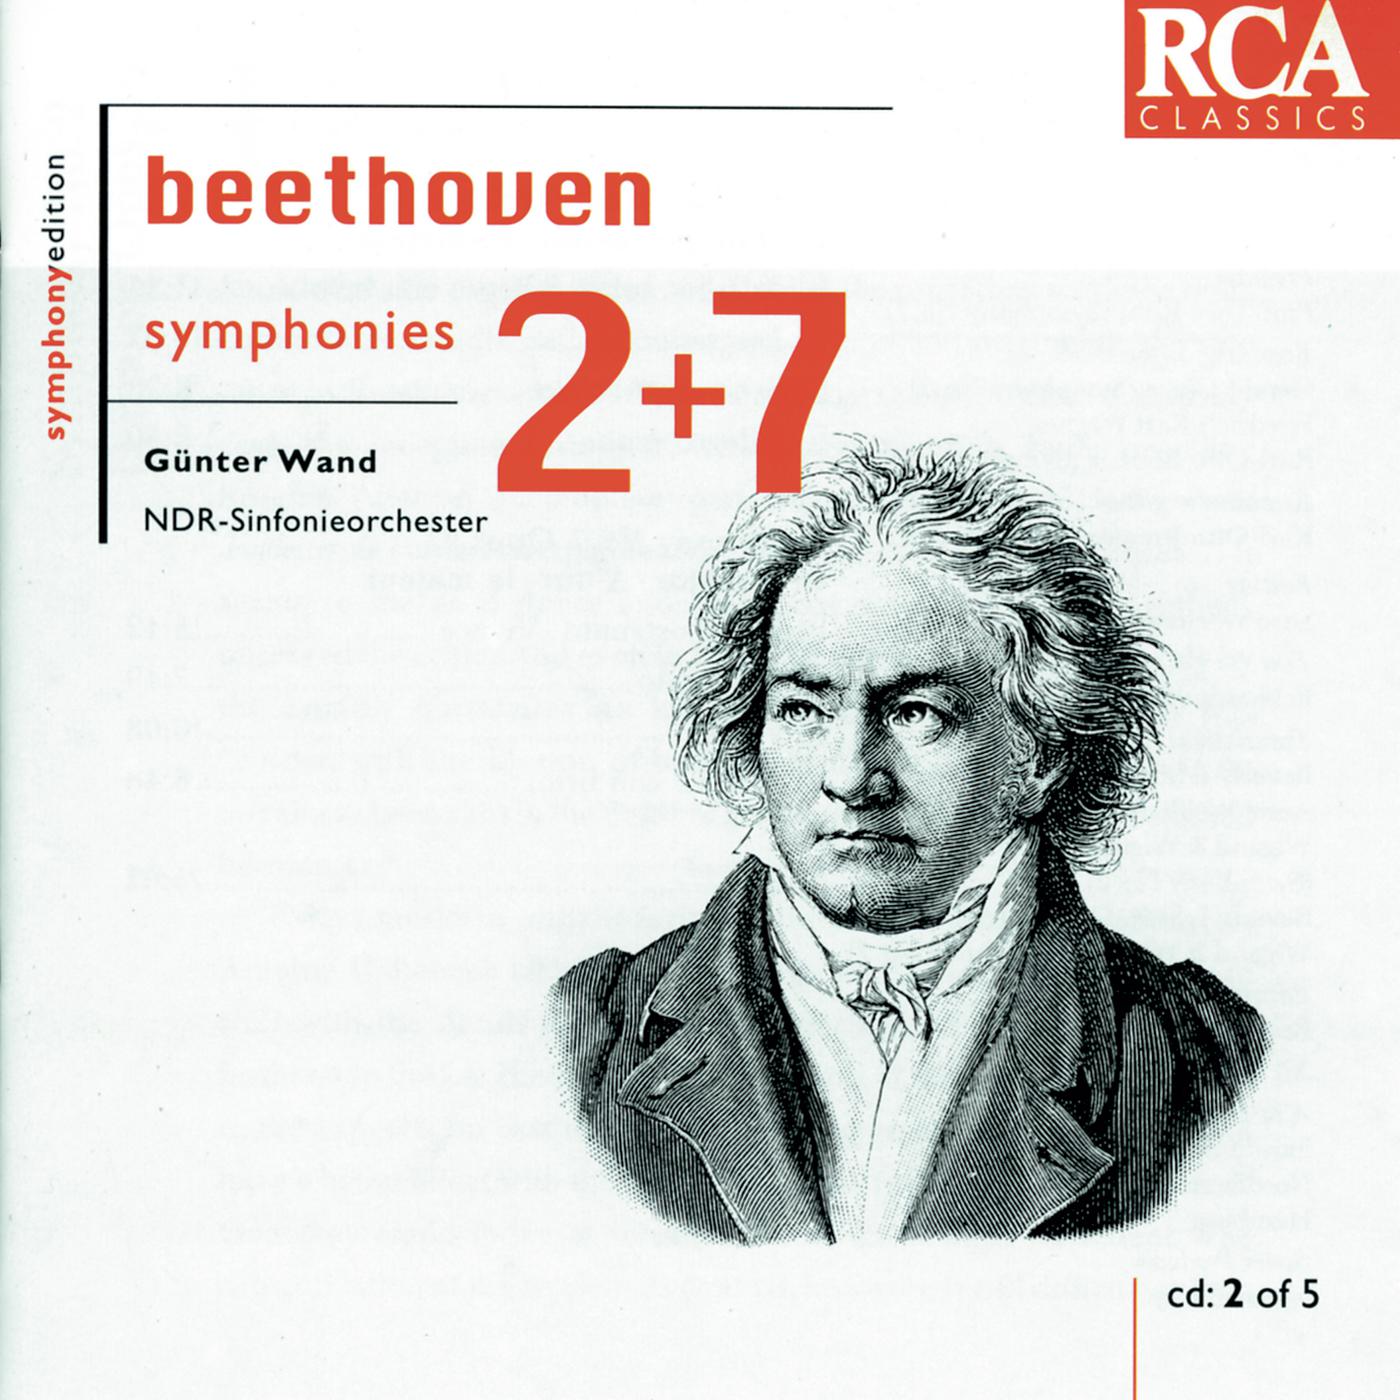 Symphony No. 2 in D major, Op. 36:Larghetto